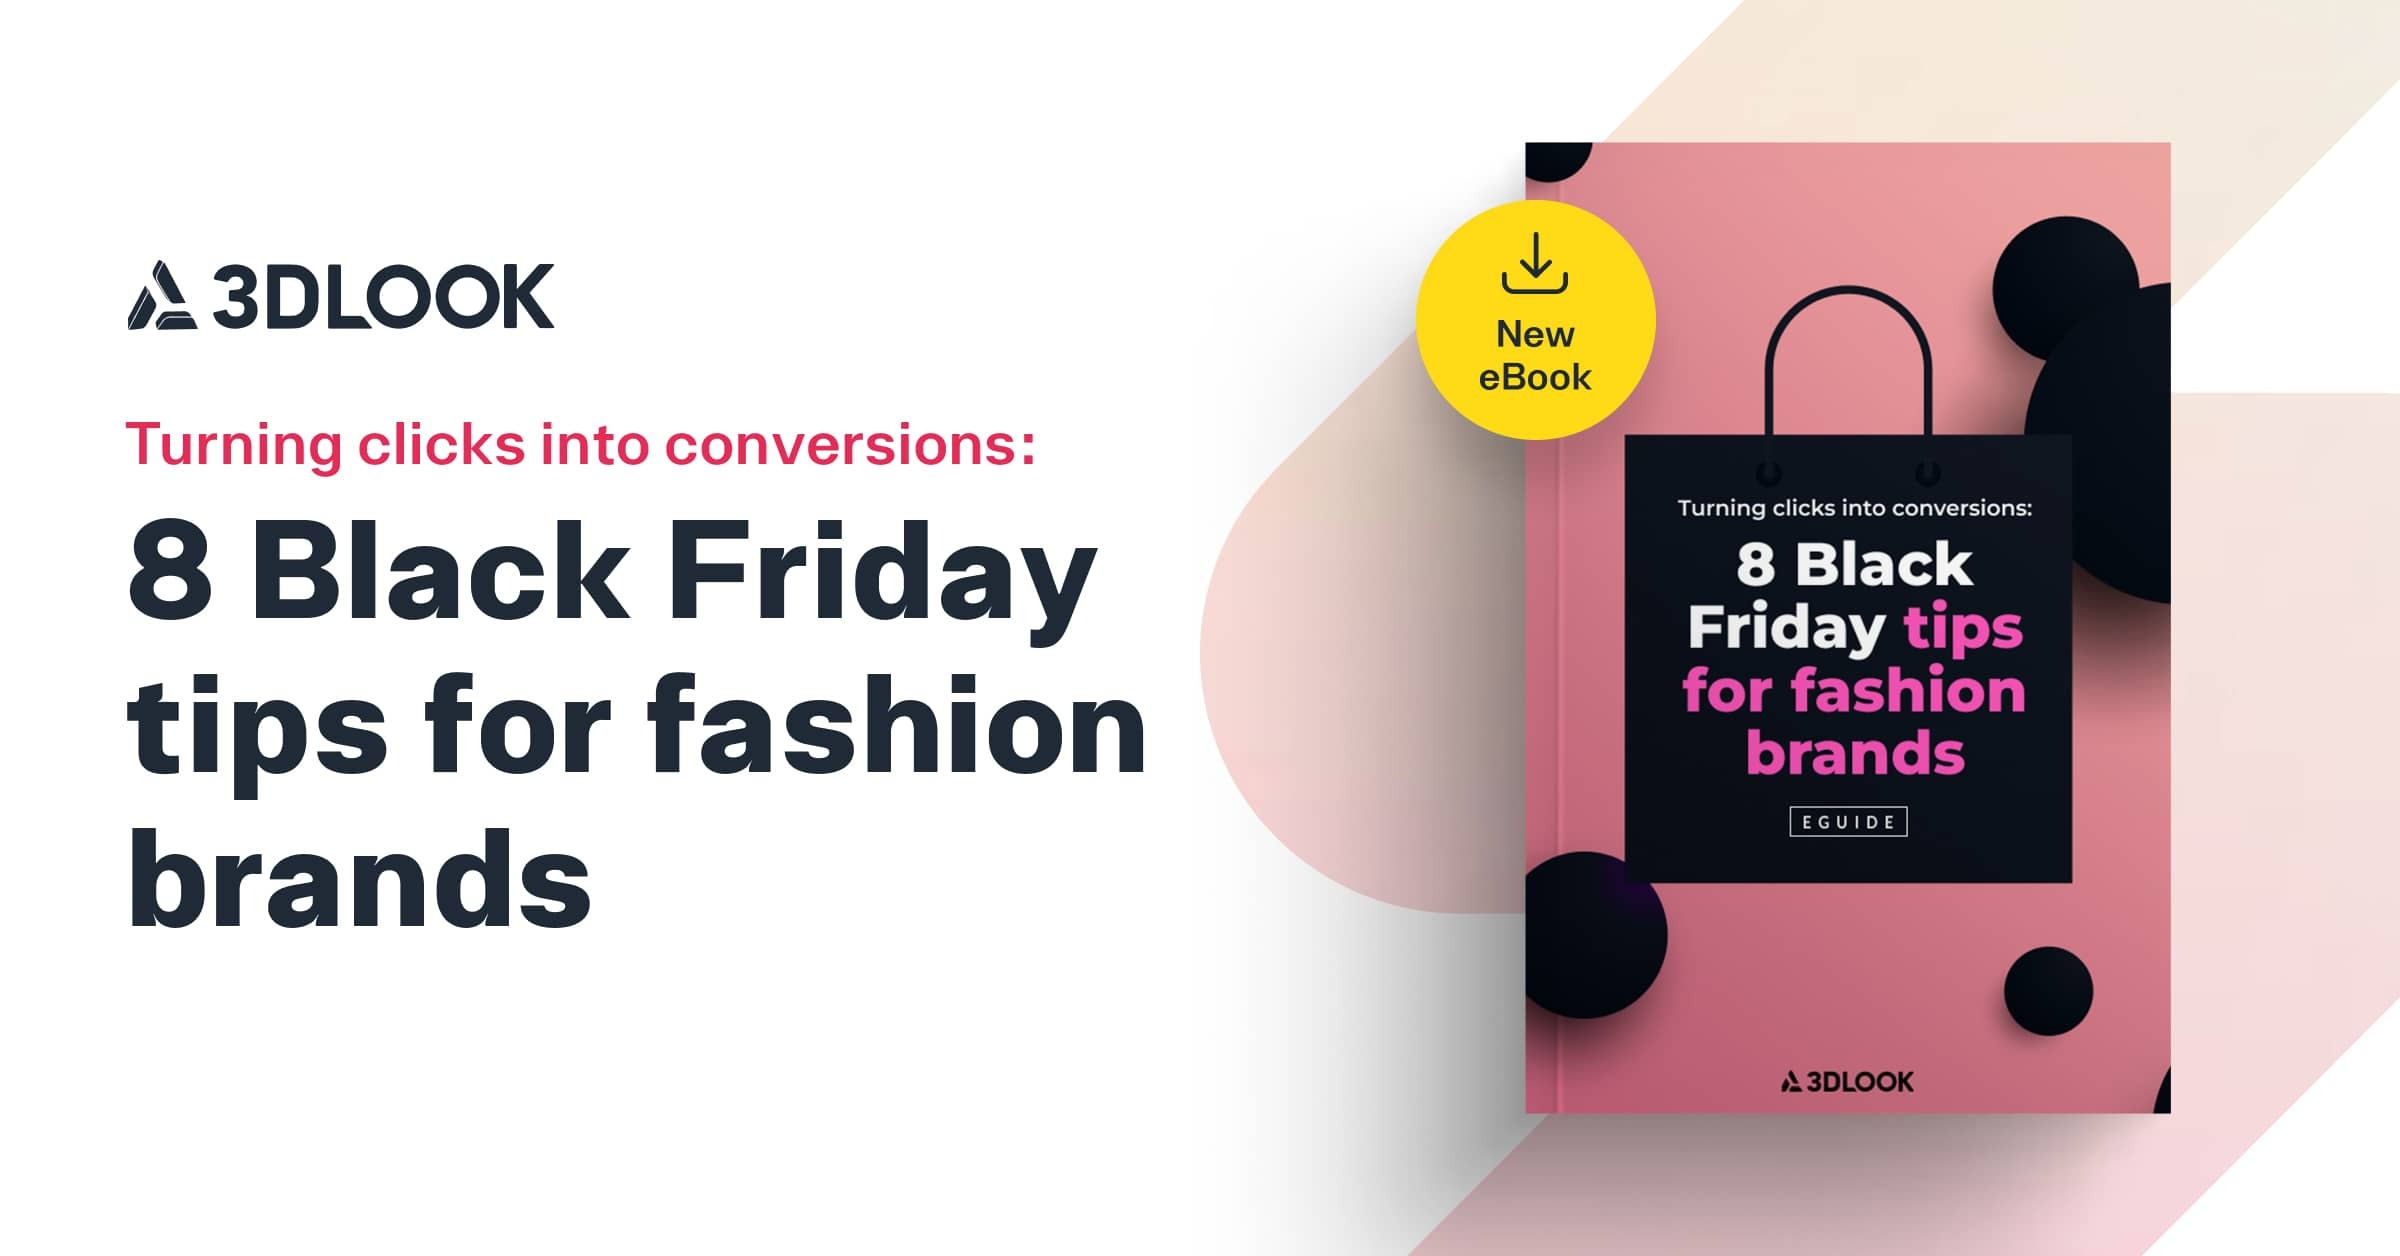 Turning clicks into conversions: 8 Black Friday tips for fashion brands